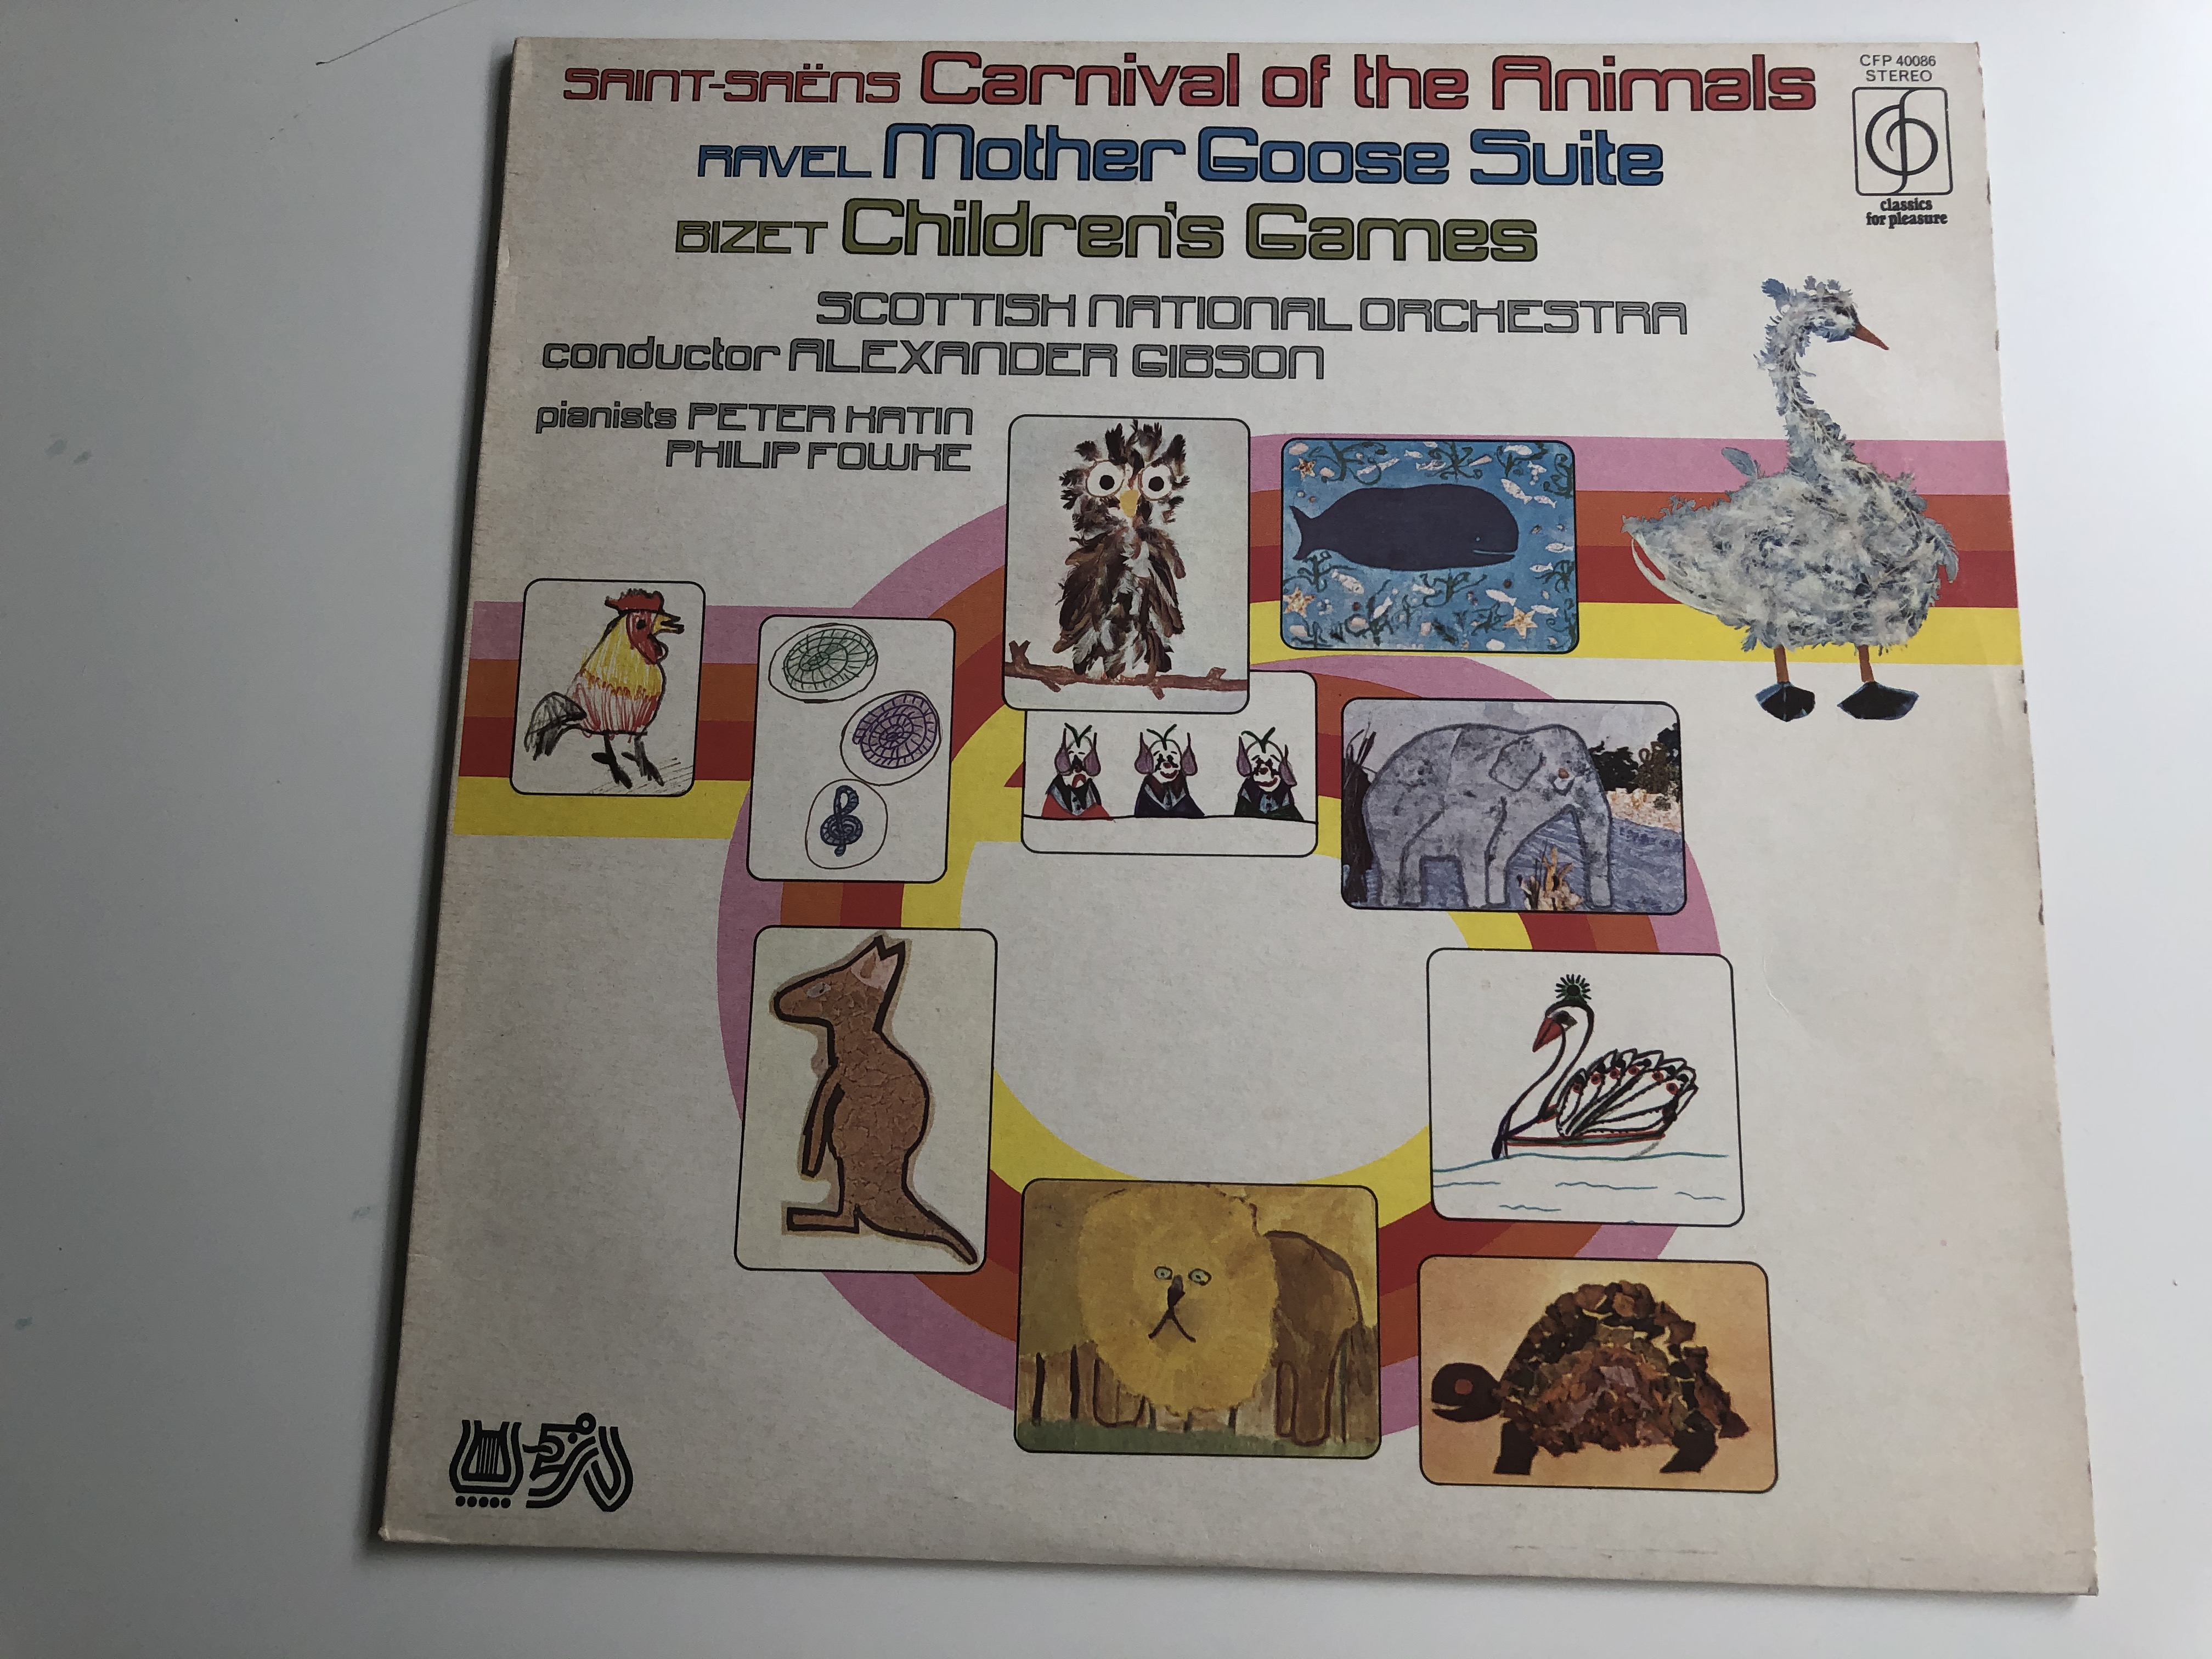 saint-sa-ns-carnival-of-the-animals-ravel-mother-goose-suite-bizet-children-s-games-scottish-national-orchestra-conductor-alexander-gibson-pianists-peter-katin-philip-fowke-classics-f-1-.jpg